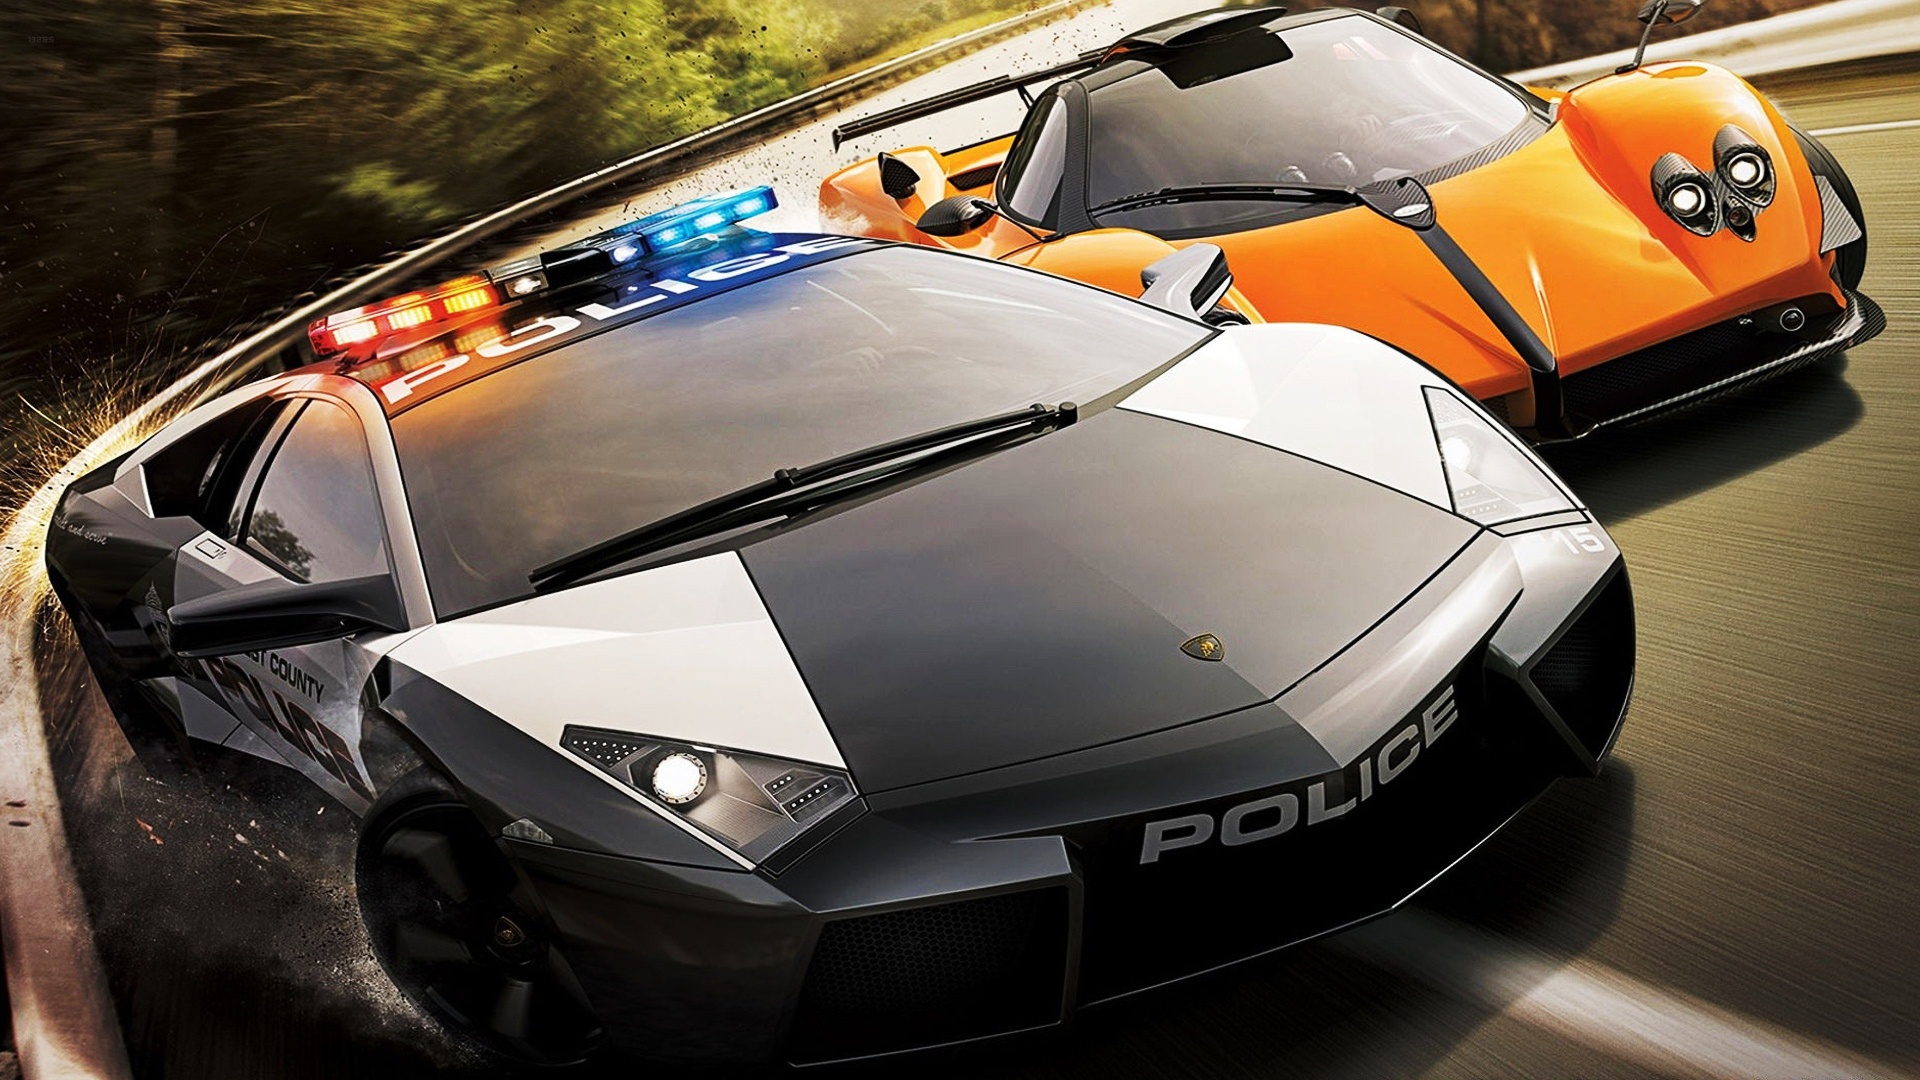 Need for speed hot pursuit 2 download pc game